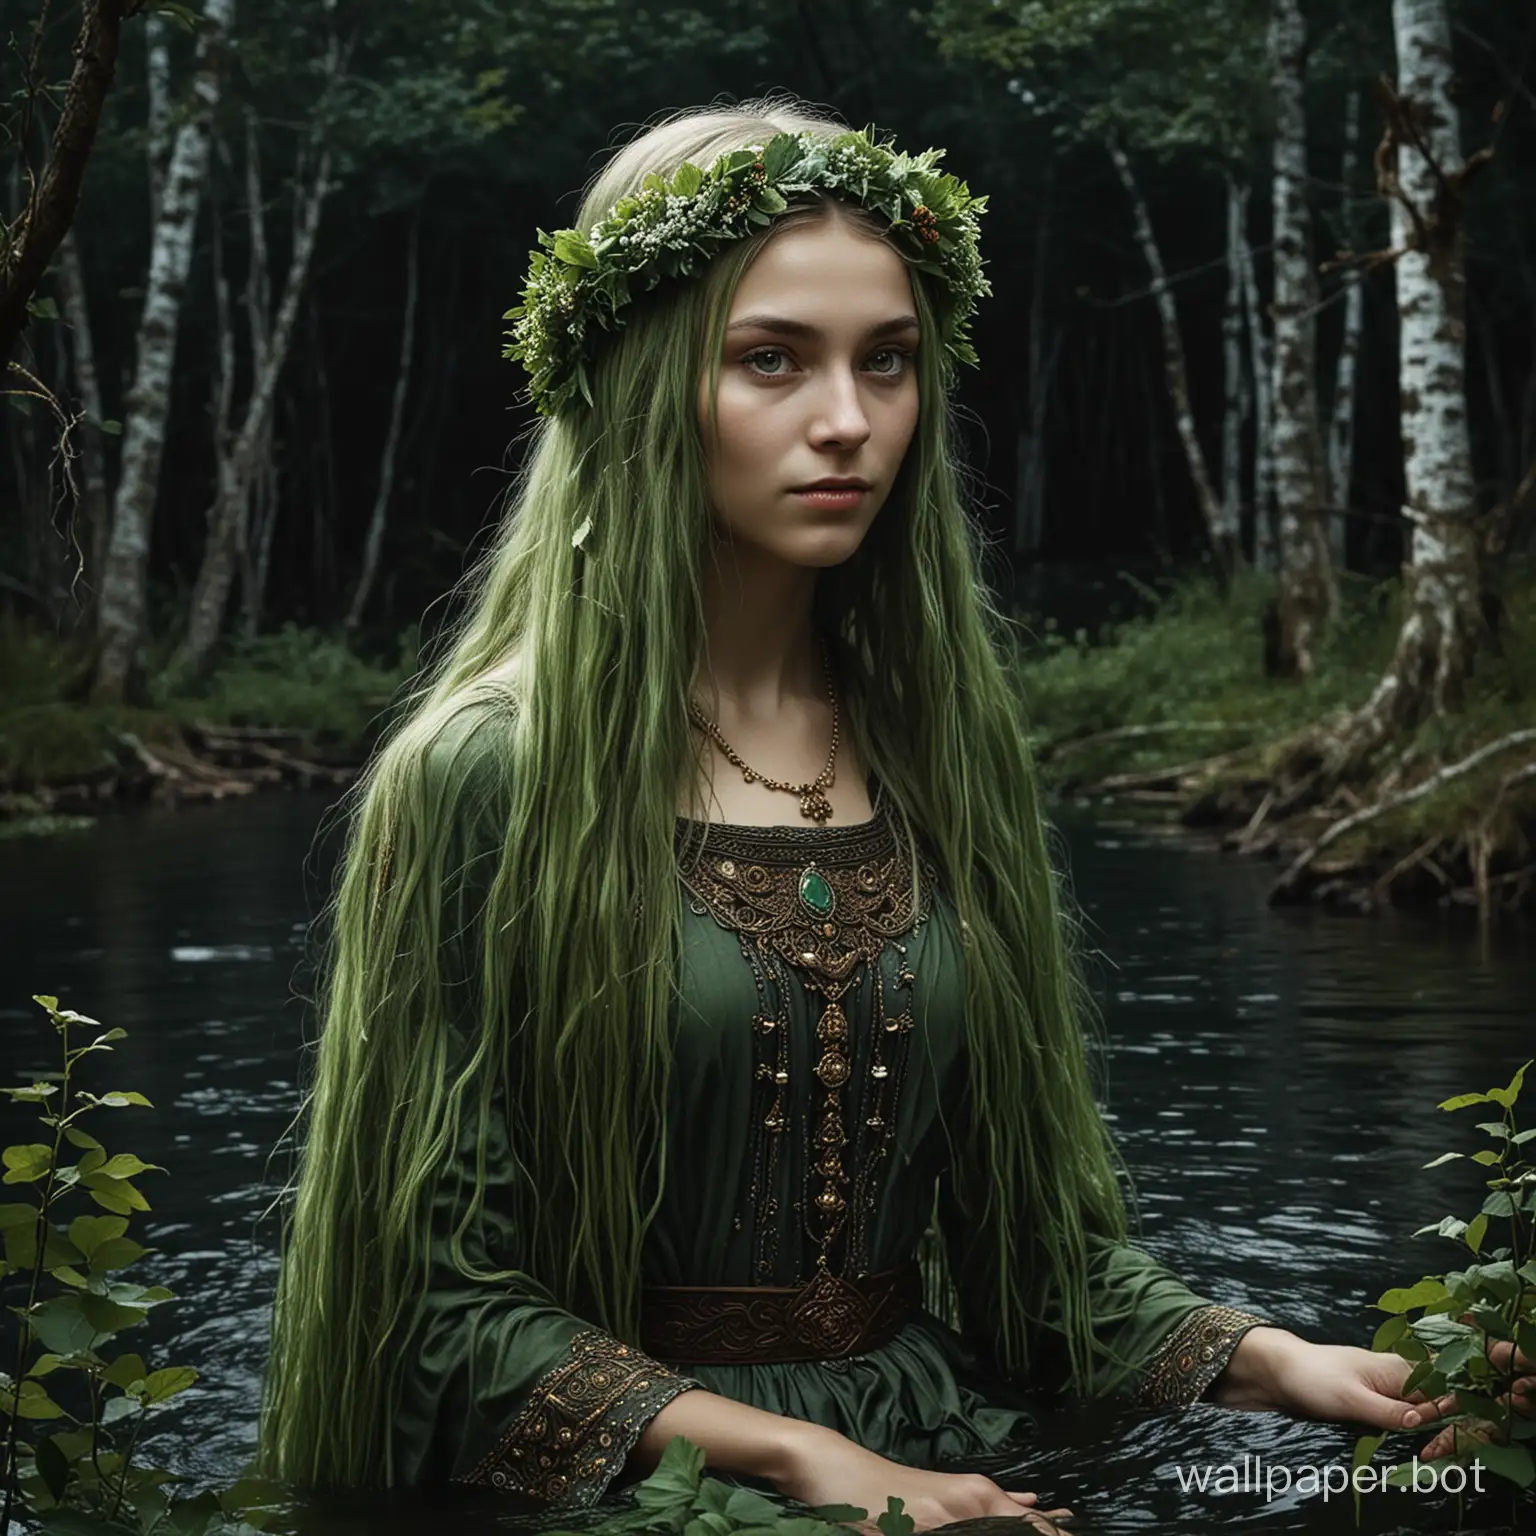 depict on a black background a mavka — a character from East Slavic mythology, living in forests. It was believed that mavkas are children who died unbaptized, as well as girls who died before marriage. Mavkas live near bodies of water, comb their long green hair, and lure travelers to lead them into the forest and tickle them to death.